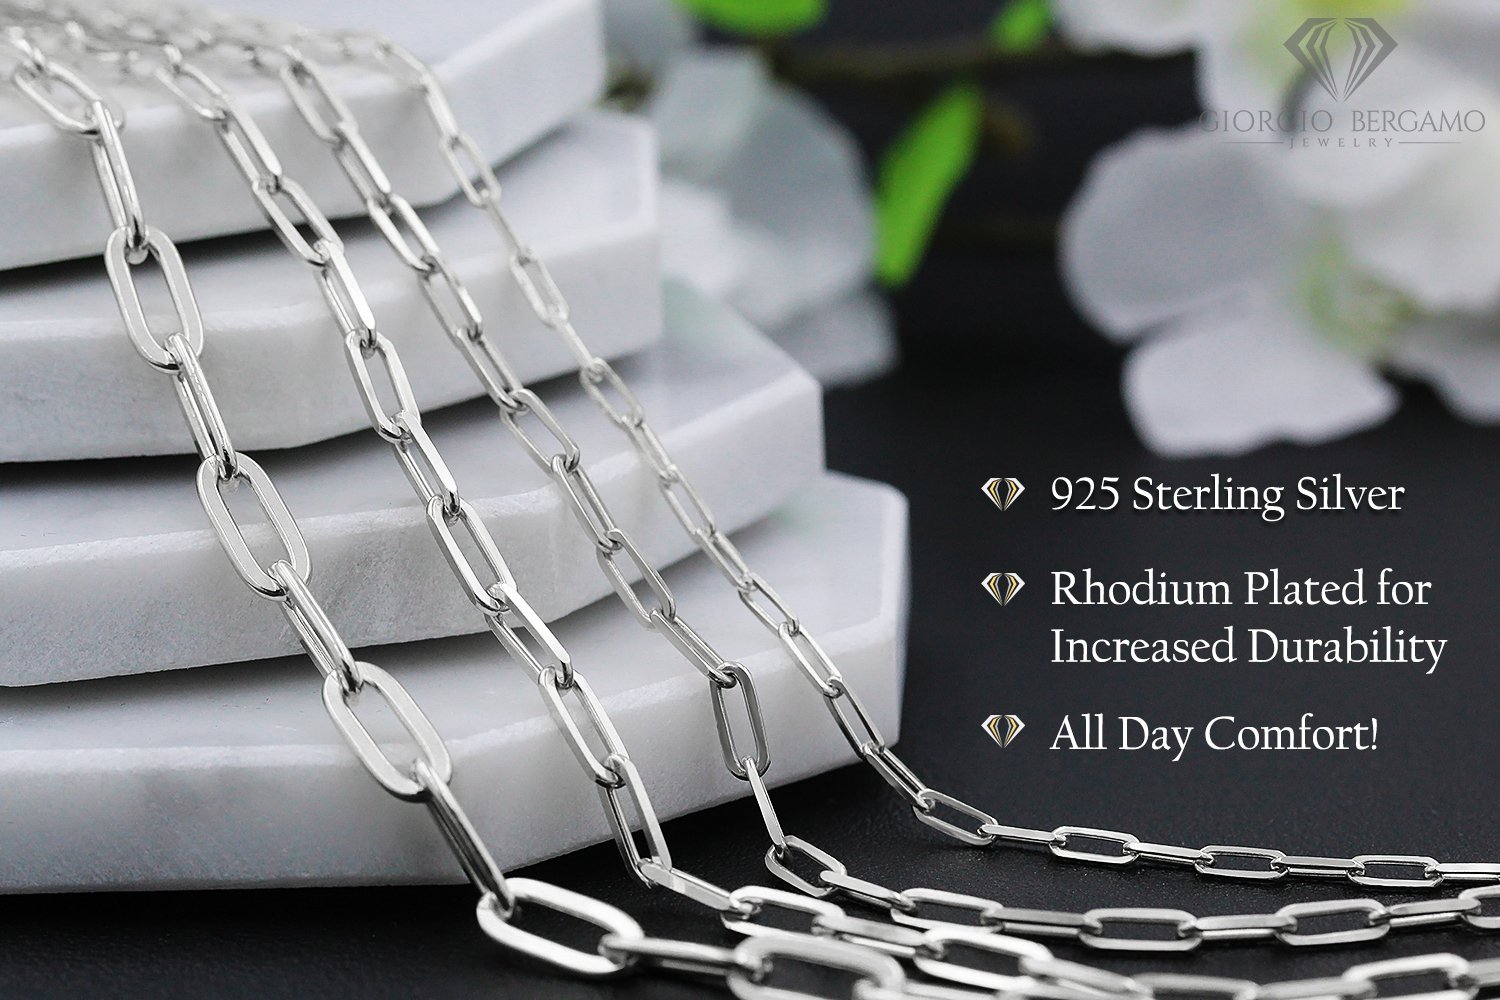 3.5mm Silver Tone Plated Chains for Men Necklace Chains Stainless Steel